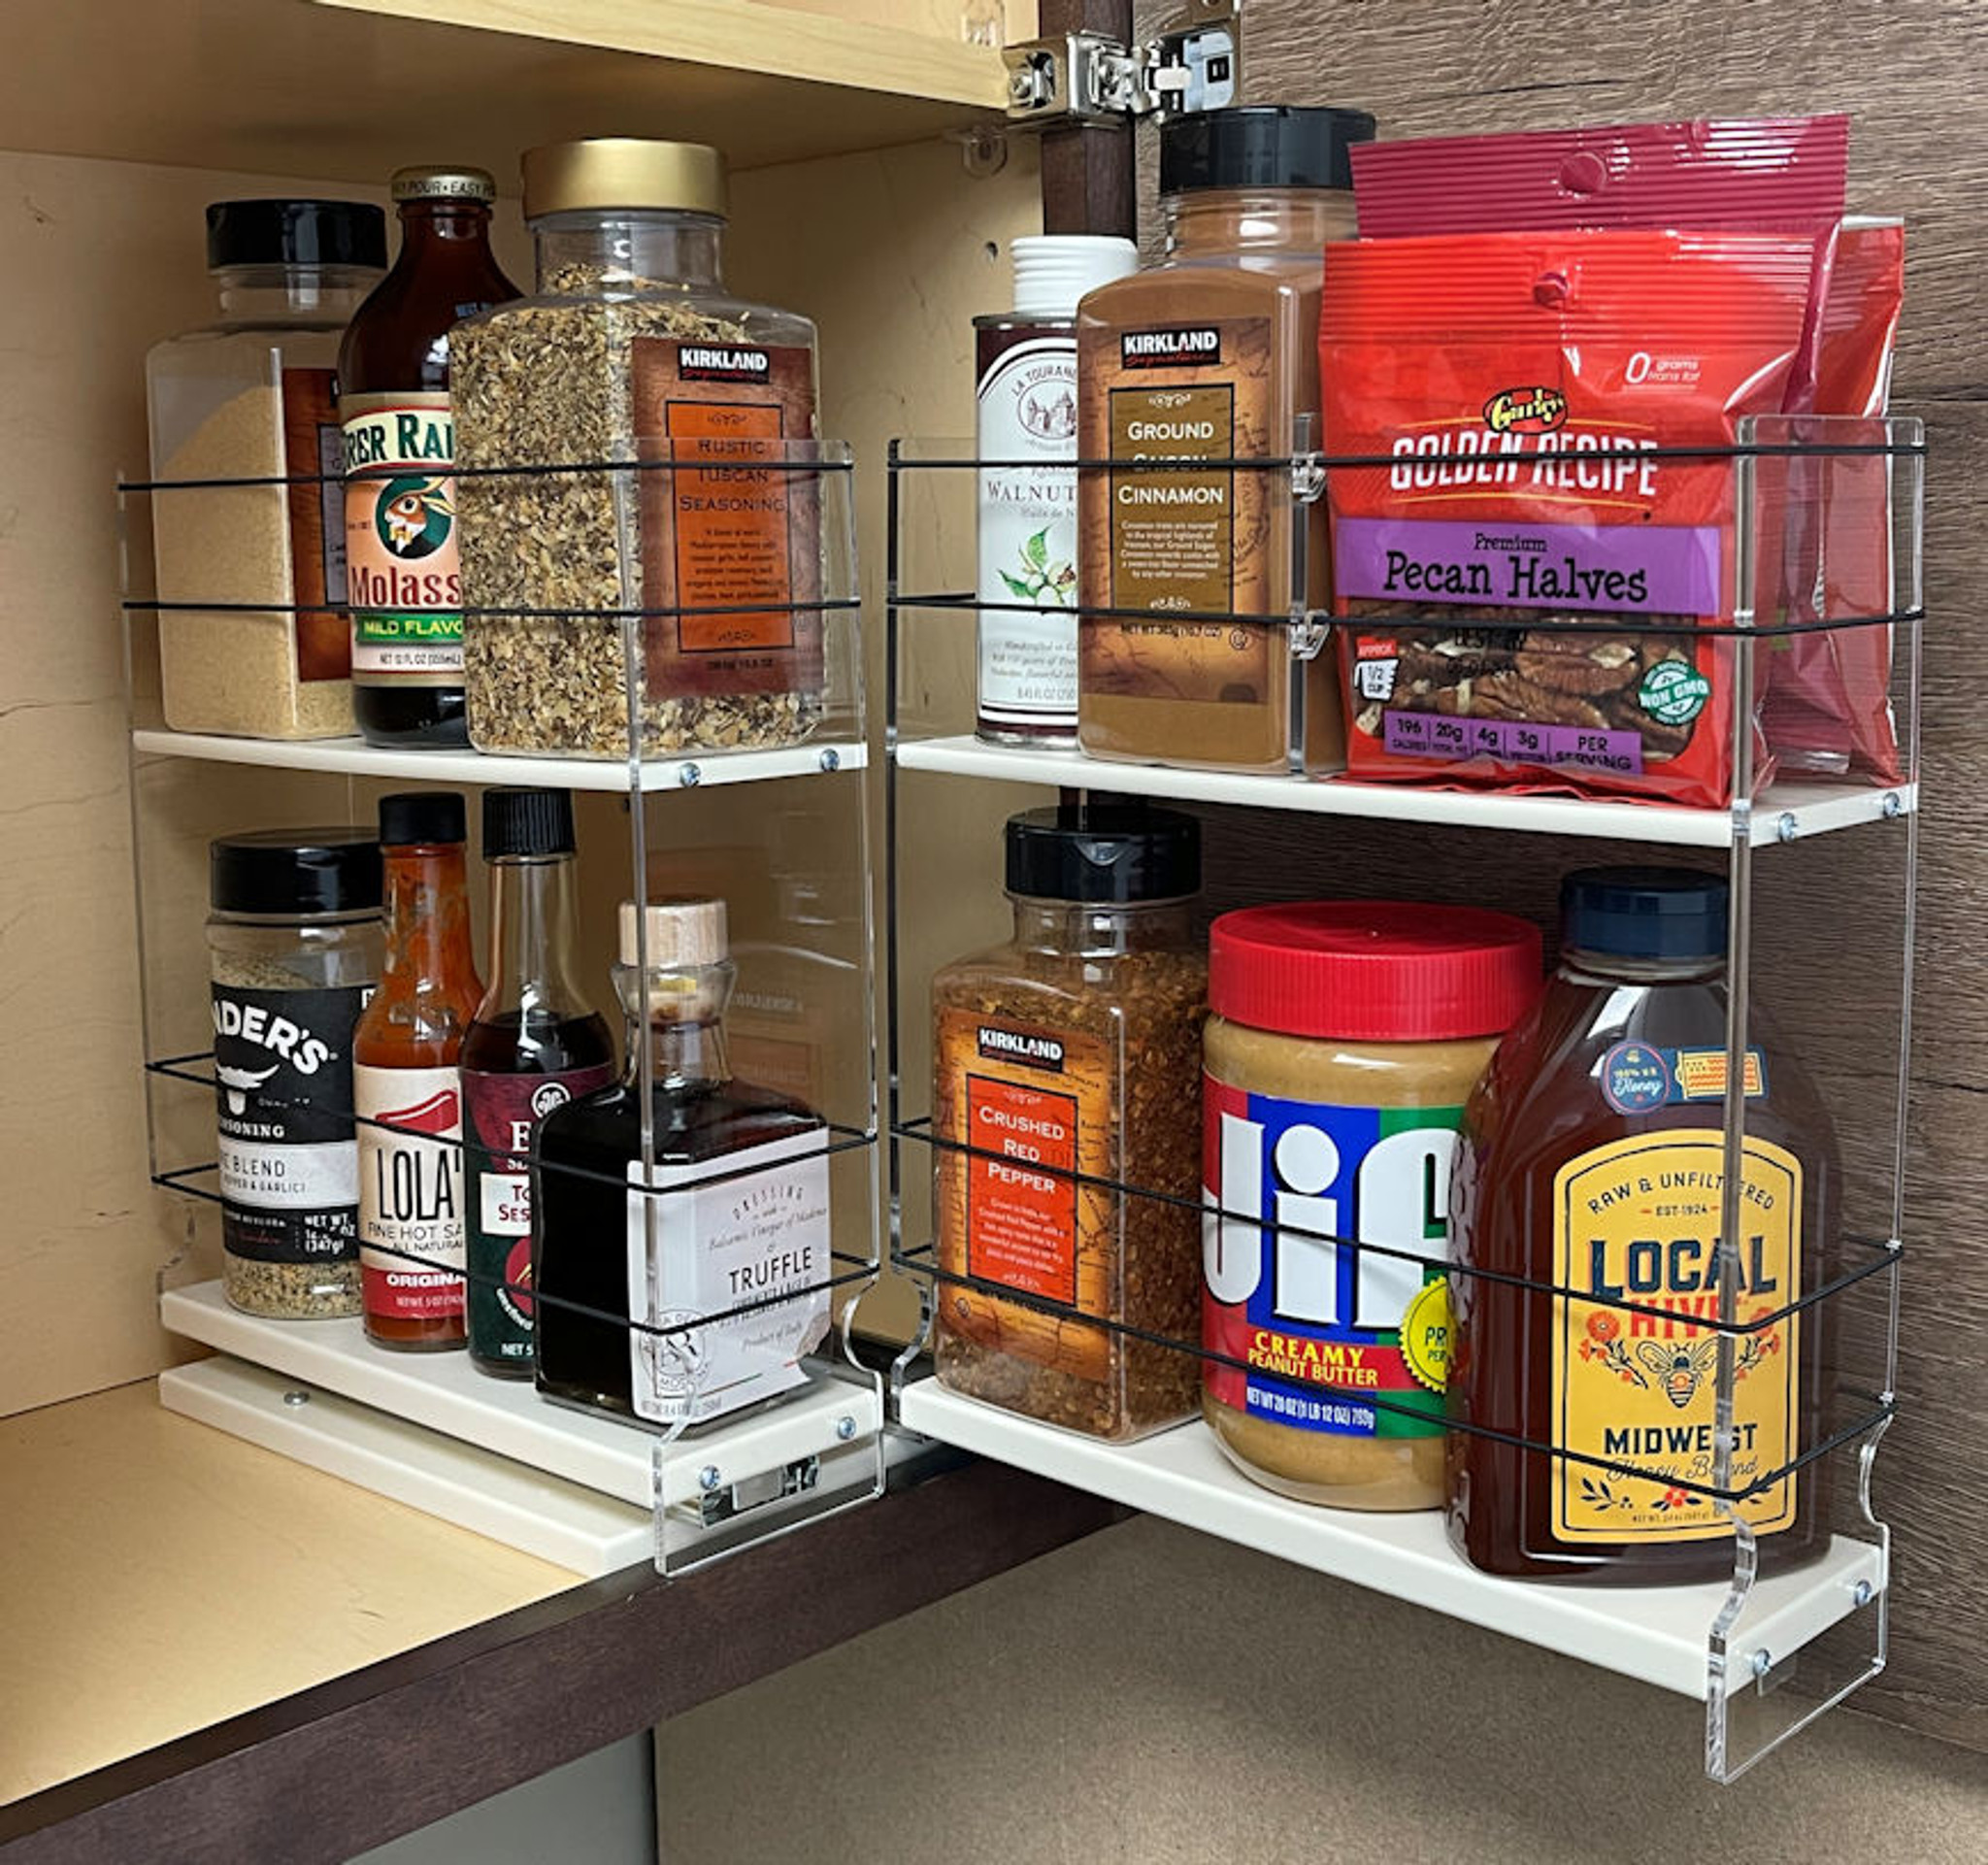 Clear Acrylic Spice Rack Kitchen Seasoning Jars Rack For Cabinet